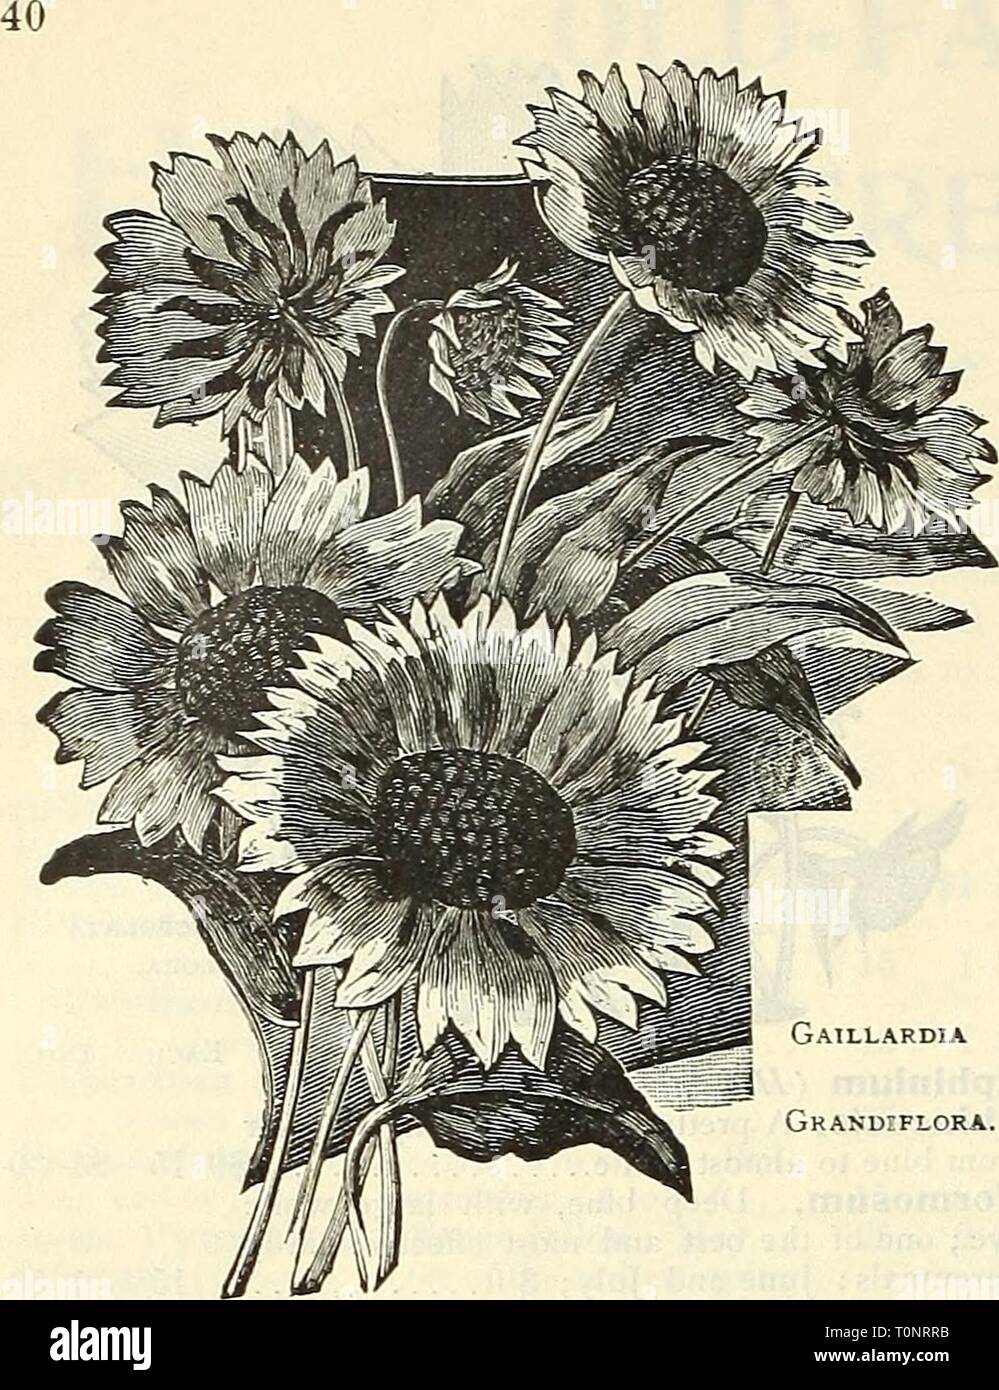 Dreer's autumn 1902 catalogue (1902) Dreer's autumn 1902 catalogue  dreersautumn19021902henr Year: 1902  Gaillardia Grandiflora. HARDY PERENNIALS—Continued. Each Gaillardia Grandiflora (Blanket Flower). One of the showiest hardy perennials, blooming throughout the entire season ; large, gorgeous flowers of crimson and gold ; 2ft $0 15 Geranium Sanguineum {Crane's Bill). Of compact habit, with bright crimson-purple flowers during summer and autumn ; 18 inches 15 Sanguineum Album. Pure white 15 Gillenia Trifoliata {Bowman's Root). Hand- some cut foliage, with white, slightly tinted pink flowers  Stock Photo